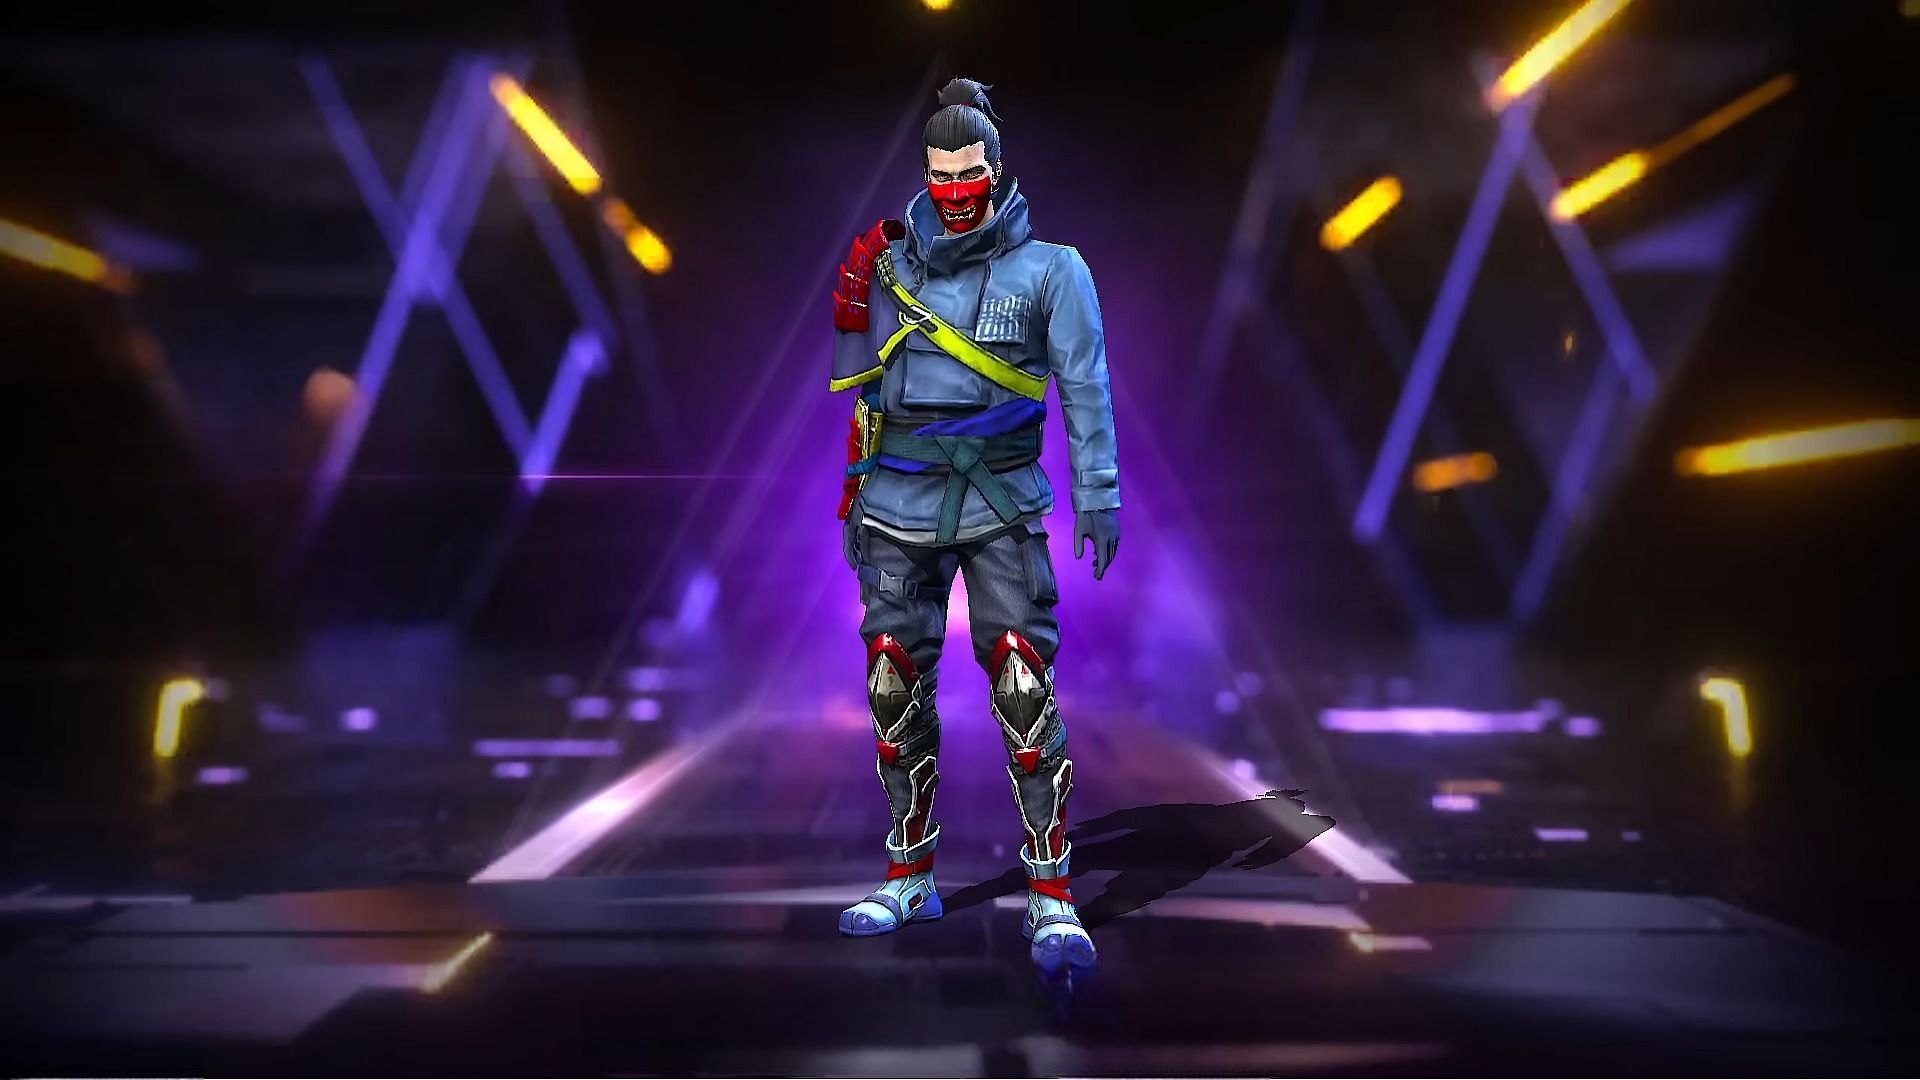 New Free Fire Iron Rave Ring event offers costume bundles (Image via Garena)